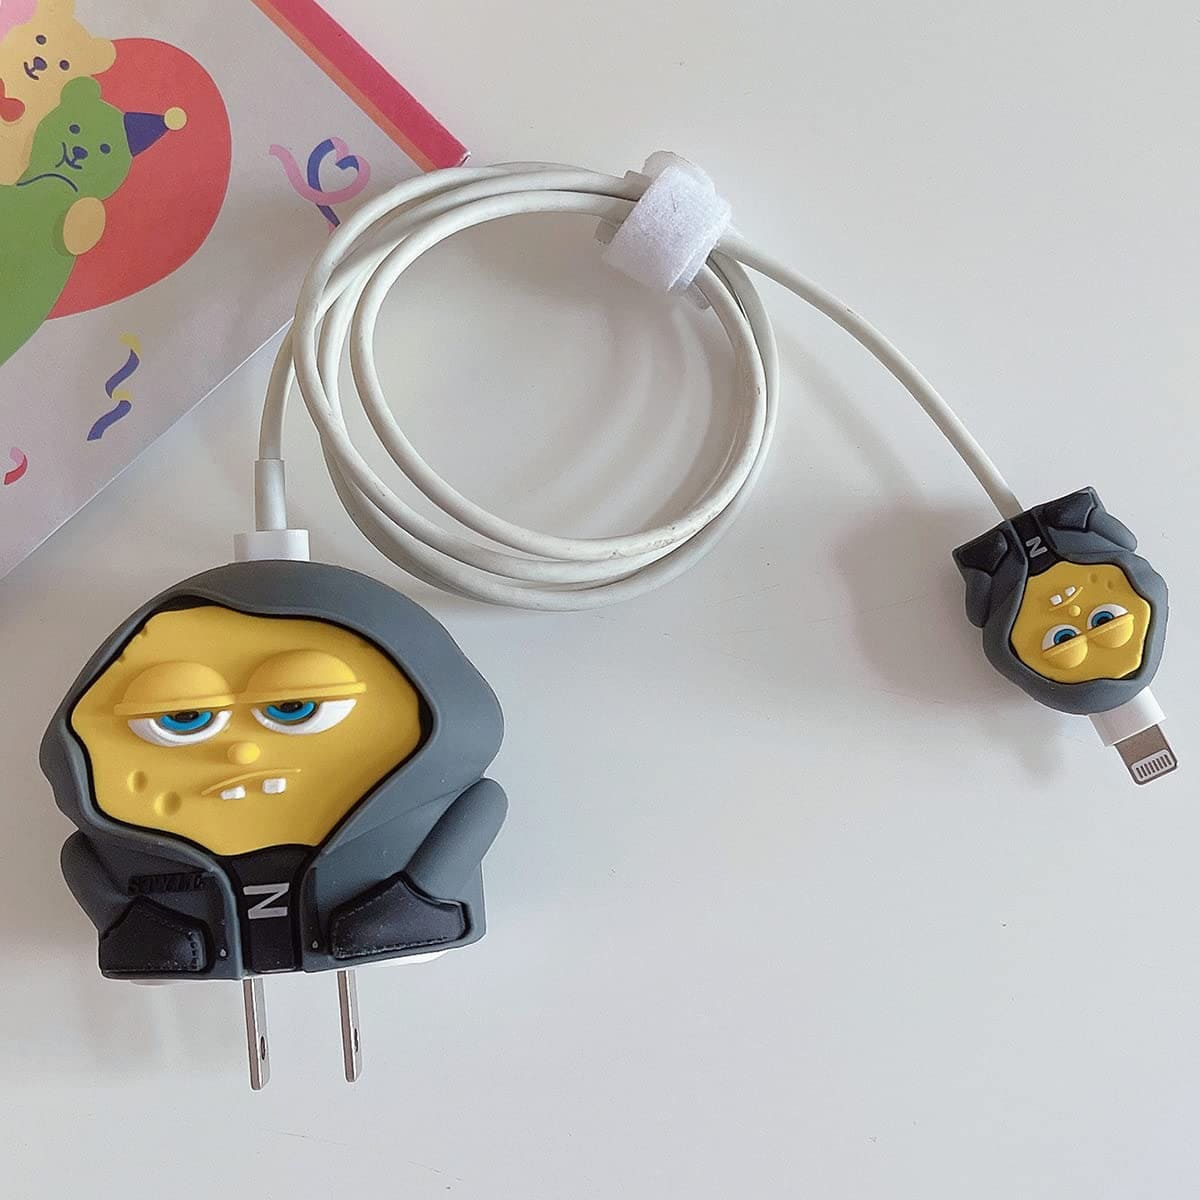 Spongebob in Hoodie Apple Charger Cover For 18-20W from hangingowl